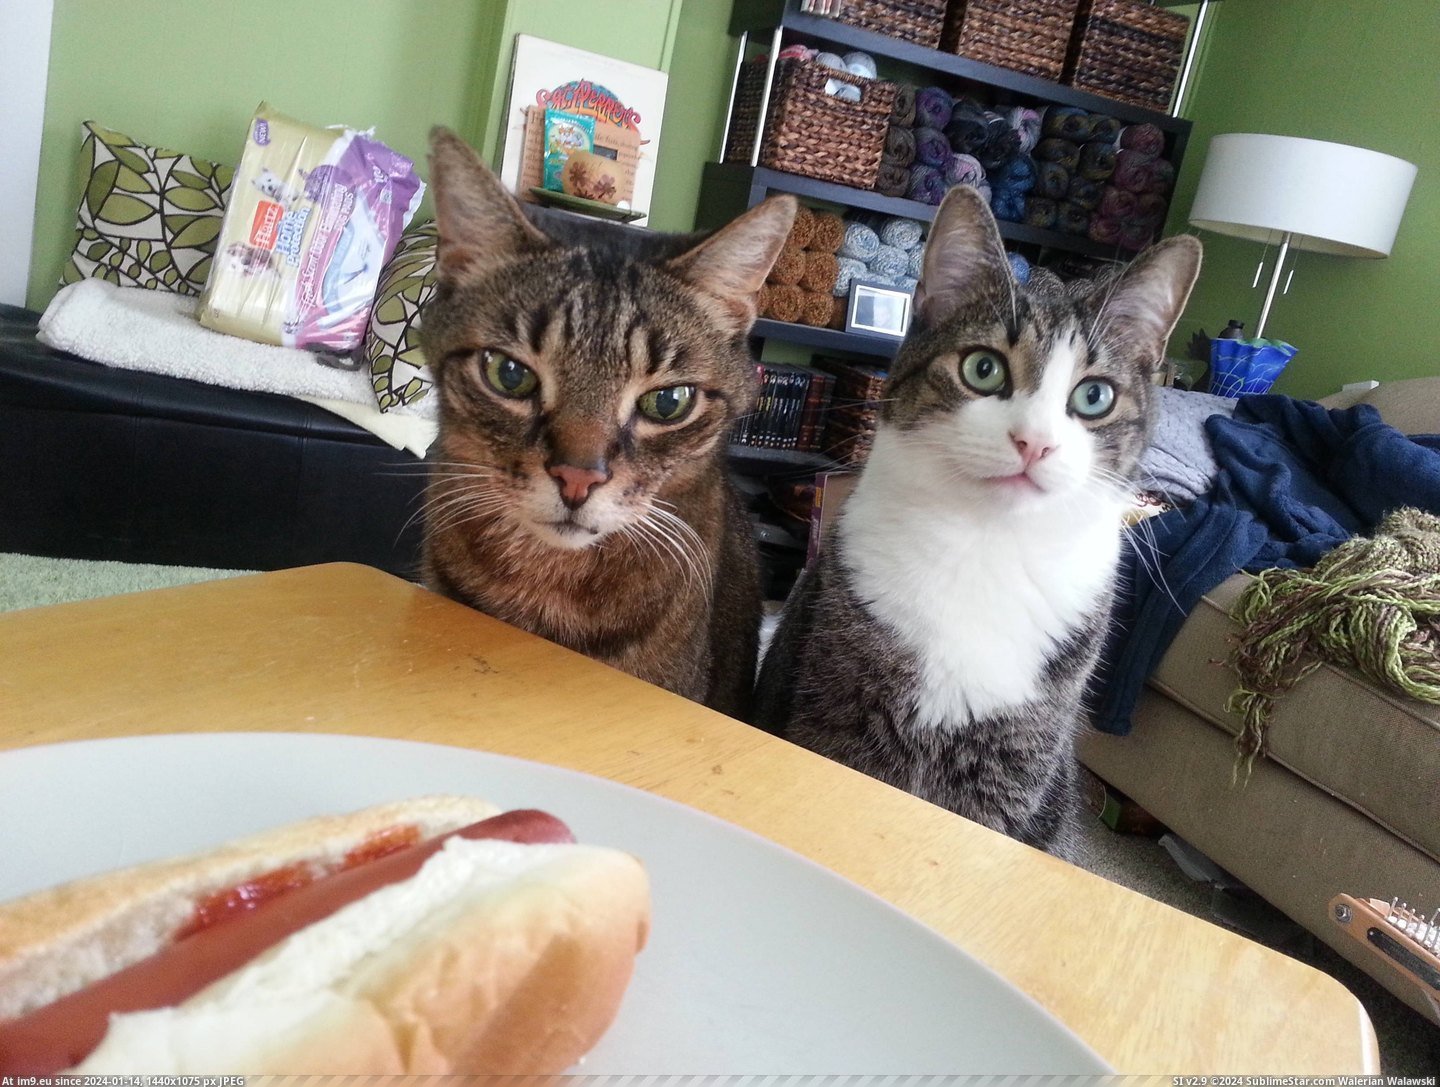 #Hot #Dogs #Cats [Cats] 'You're having hot dogs? We like hot dogs!' Pic. (Изображение из альбом My r/CATS favs))